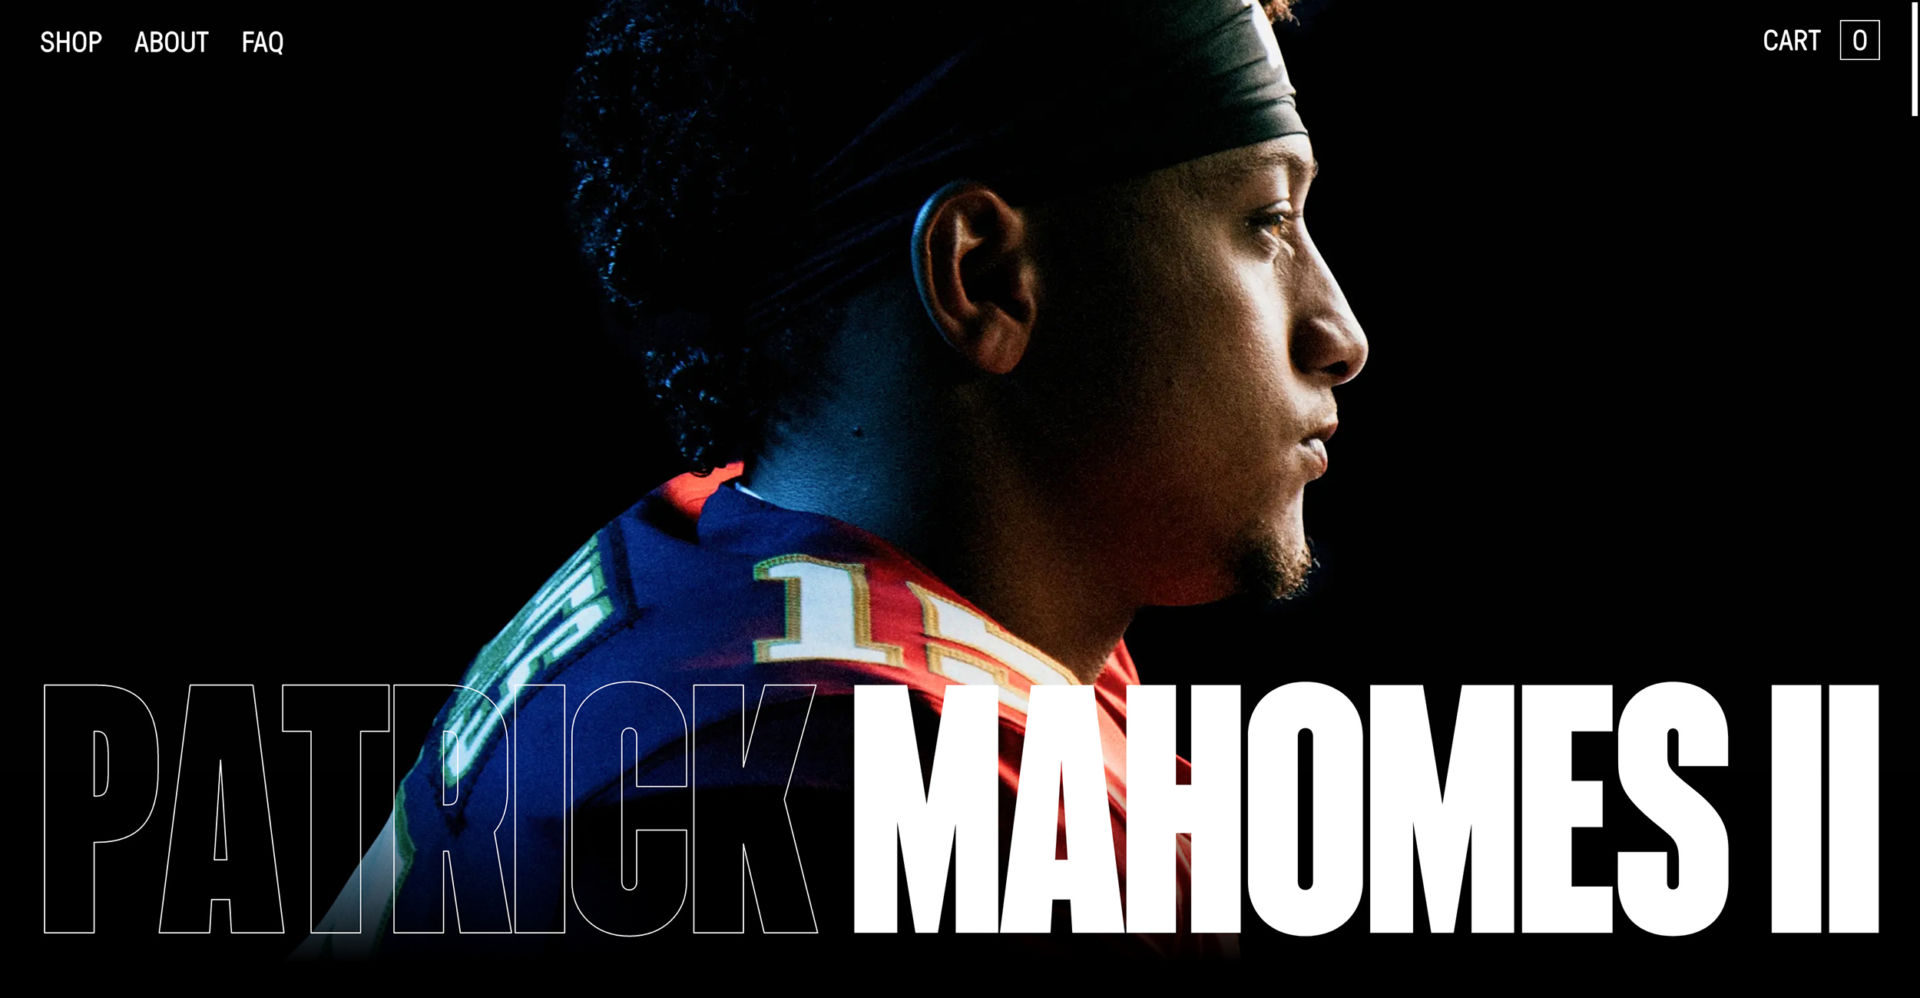 Image shows a screen shot of Patrick Mahomes' website - a picture of Patrick Mahomes with his name below it.